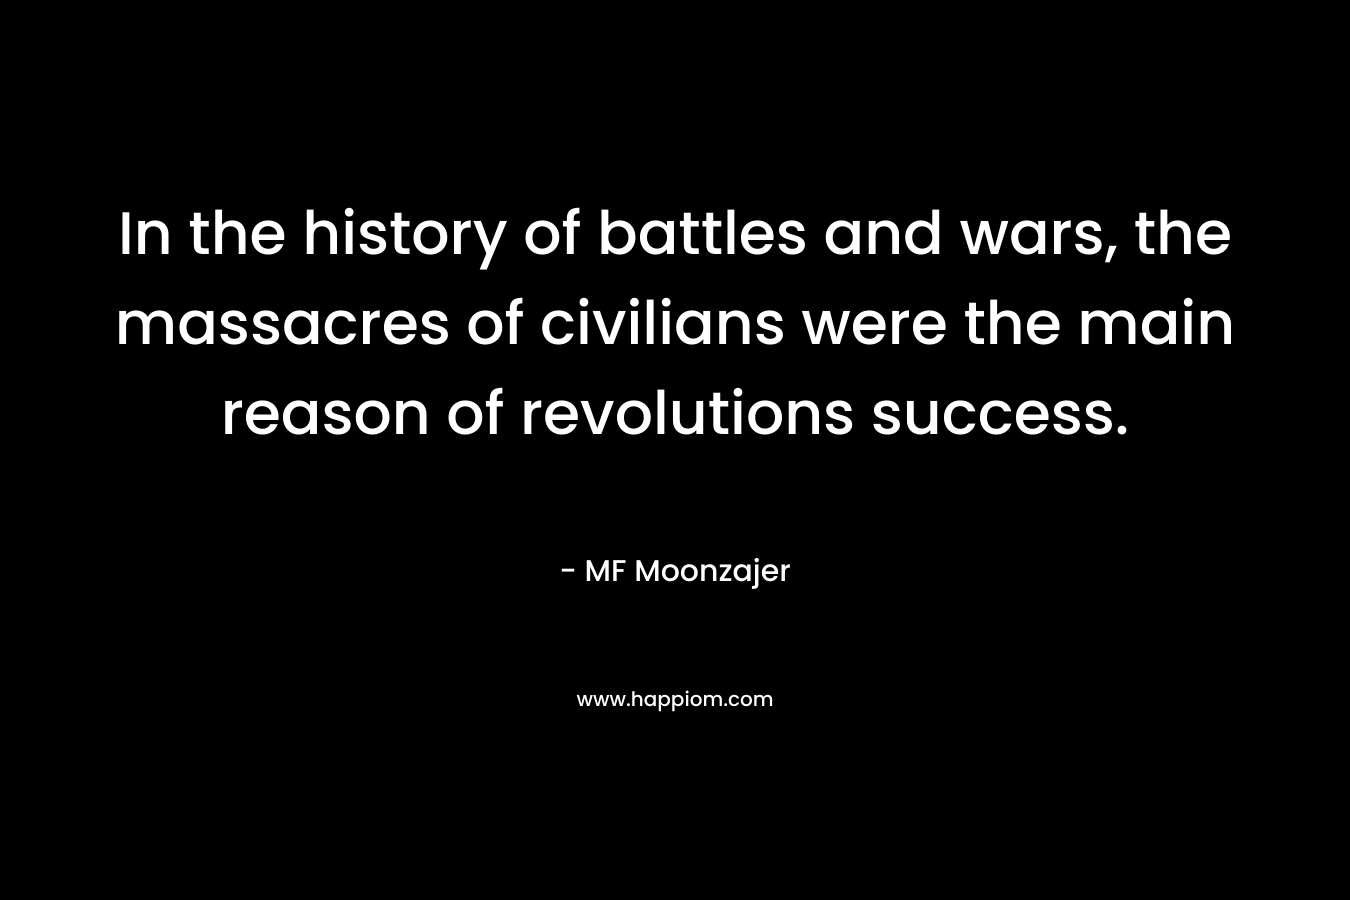 In the history of battles and wars, the massacres of civilians were the main reason of revolutions success. – MF Moonzajer